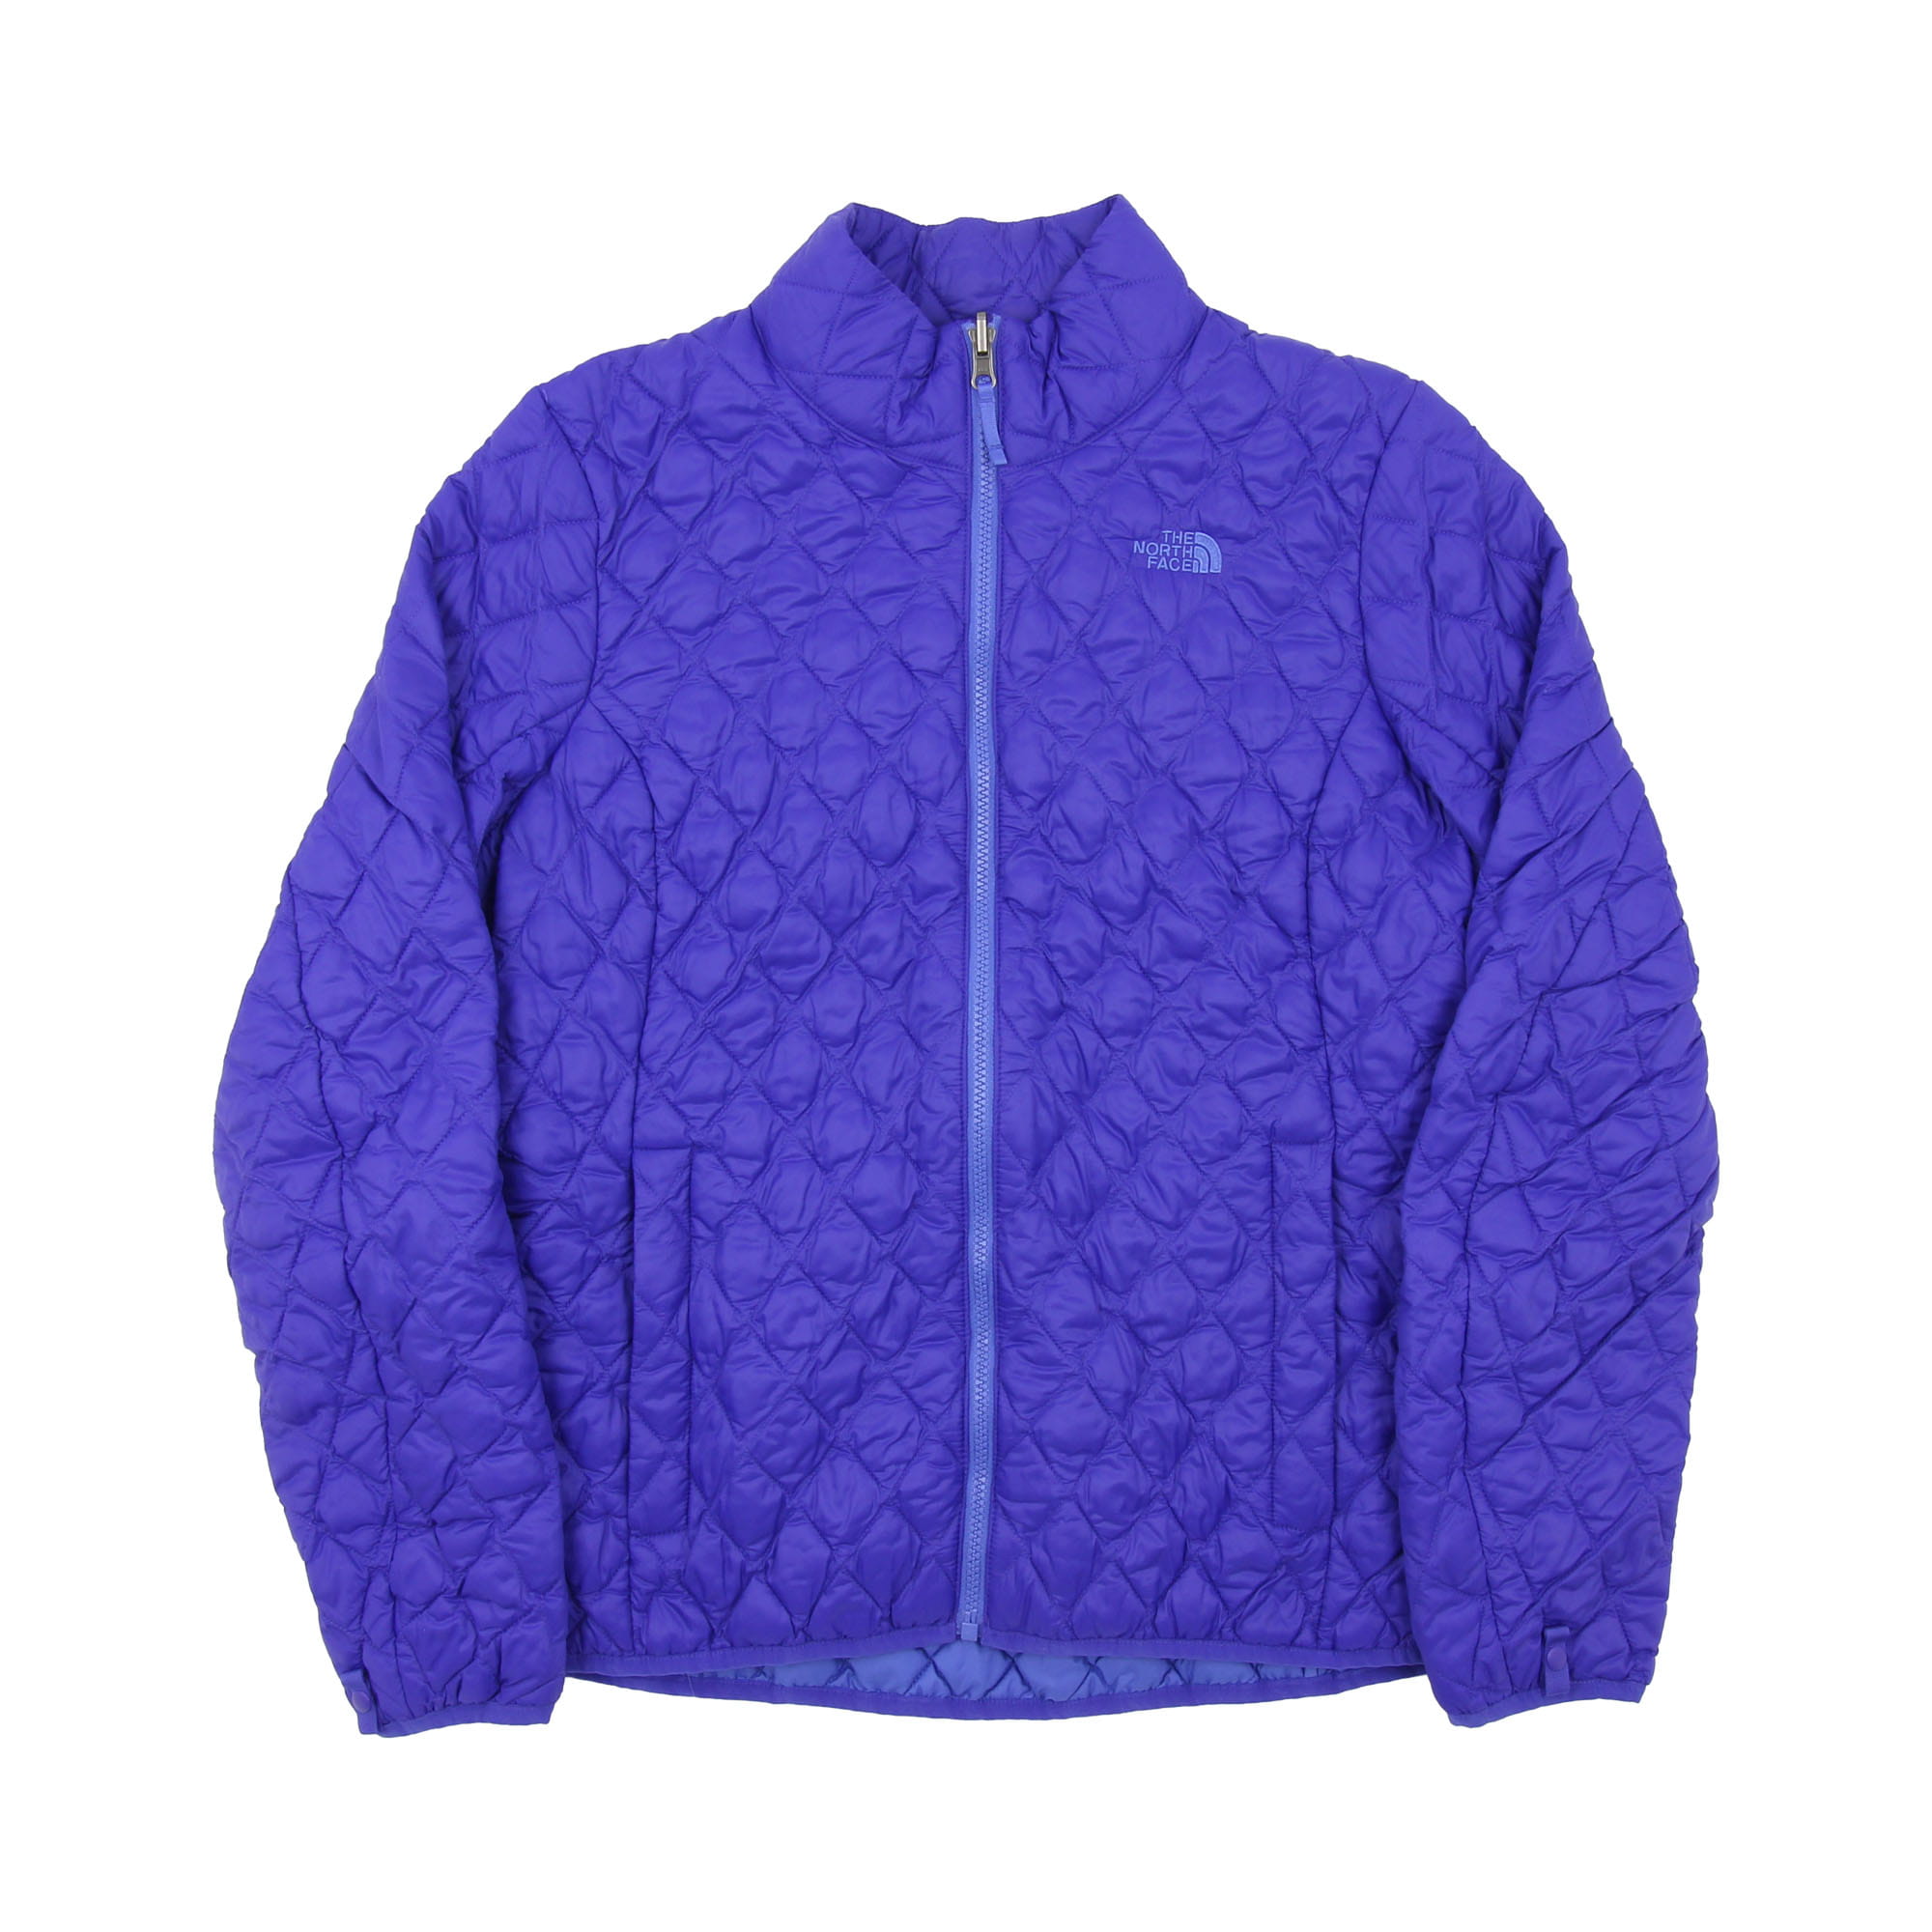 The North Face Puffer Jacket Purple - Women's M